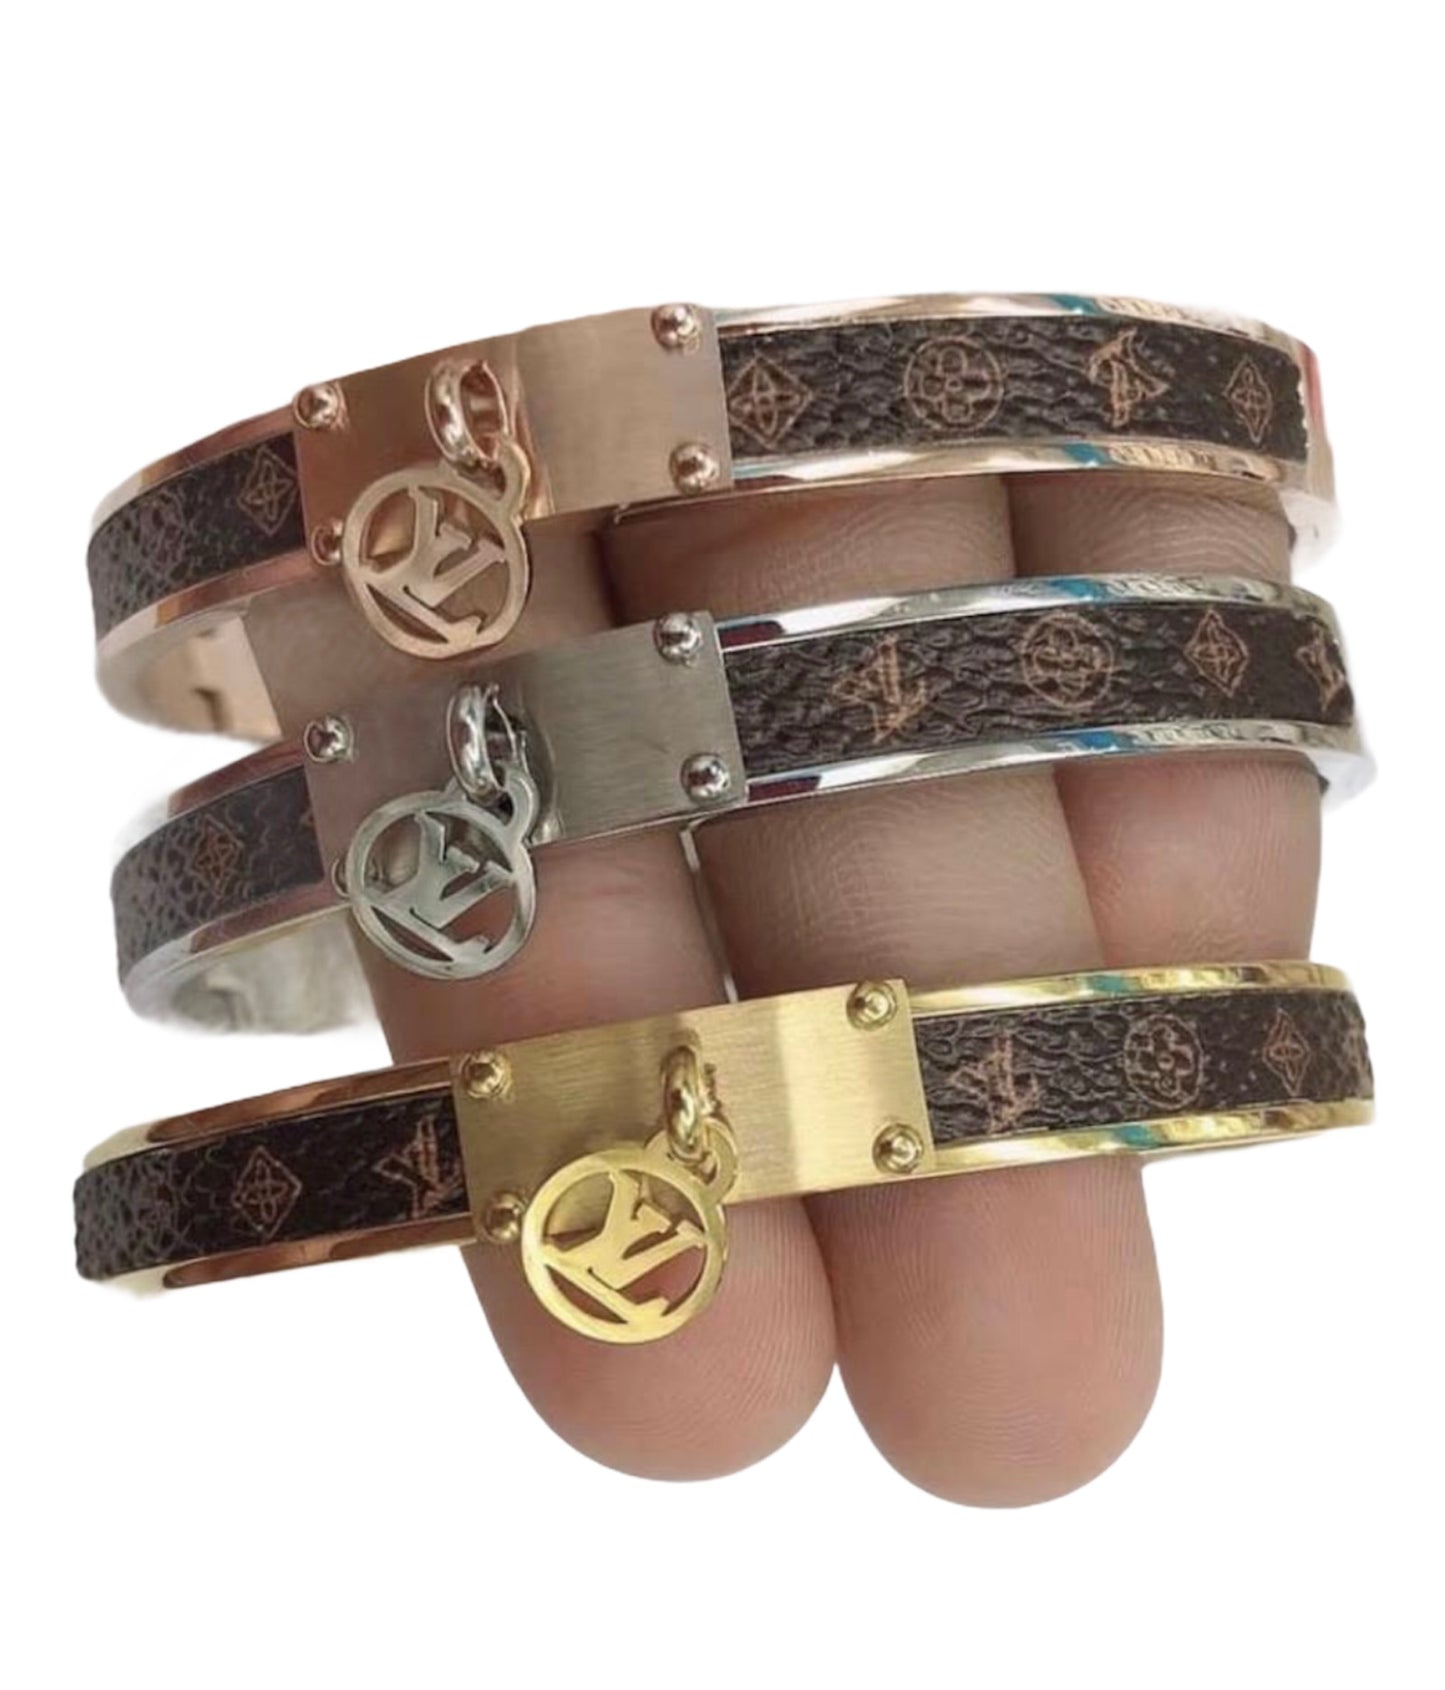 Lv Leather Design Stainless Steel Bangle